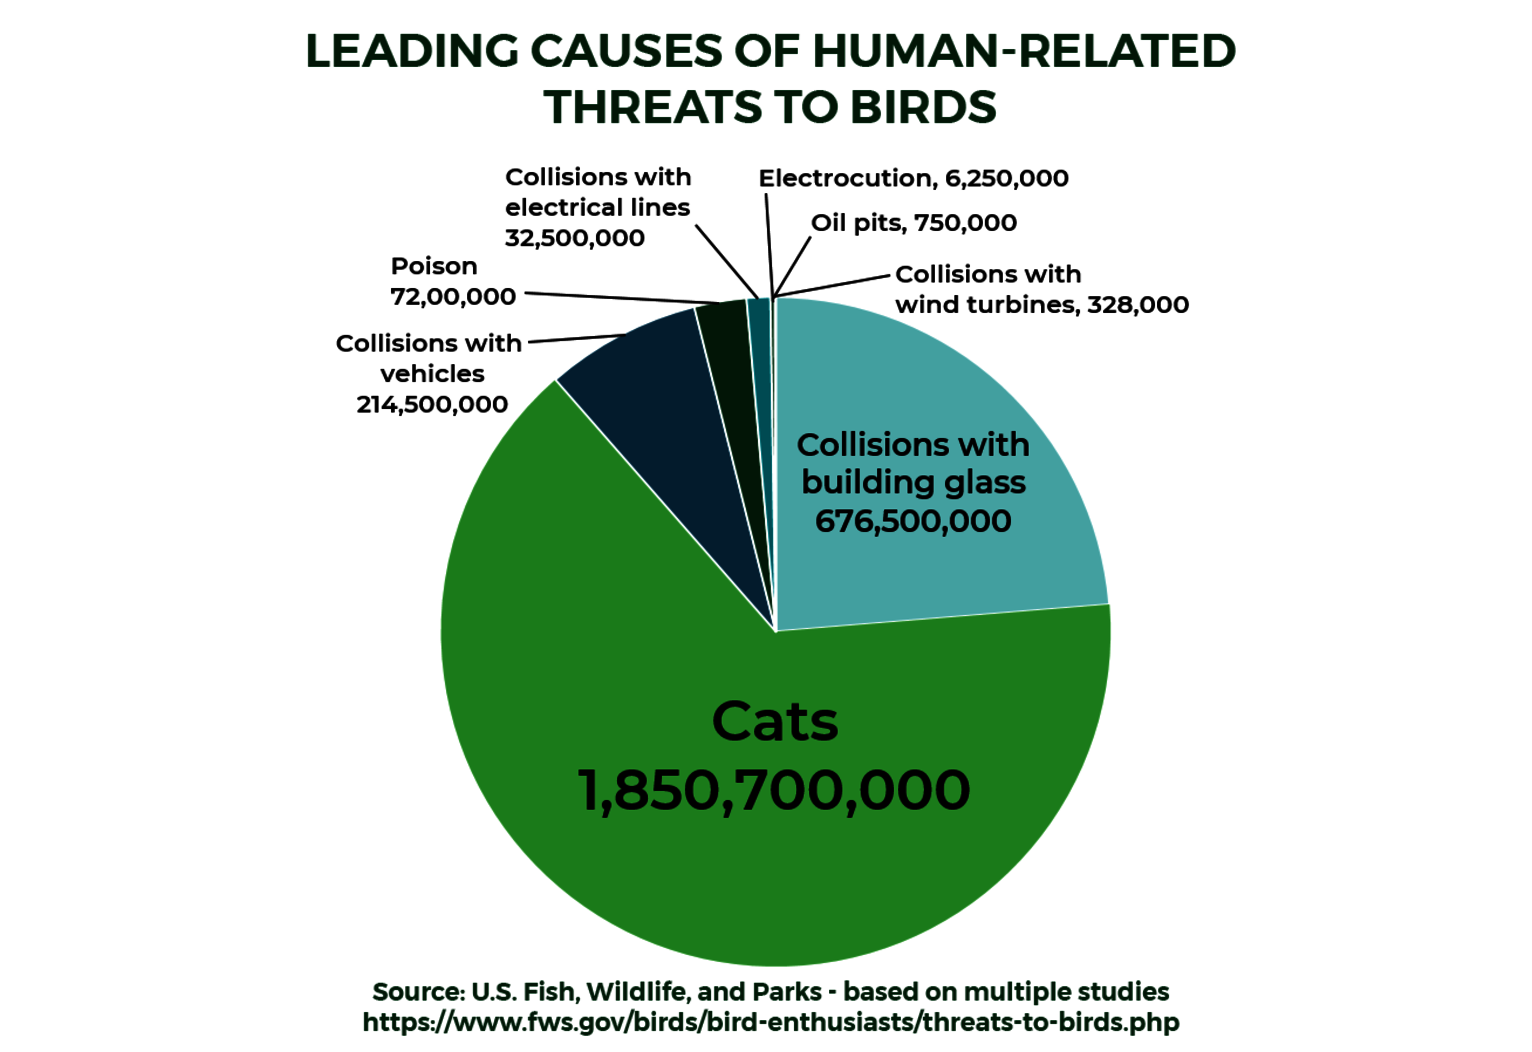 Leading causes of human-related threats to birds: Domestic cats are the biggest source of mortality, followed by collisions with building glass and collisions with vehicles. Graphic: NYC Audubon